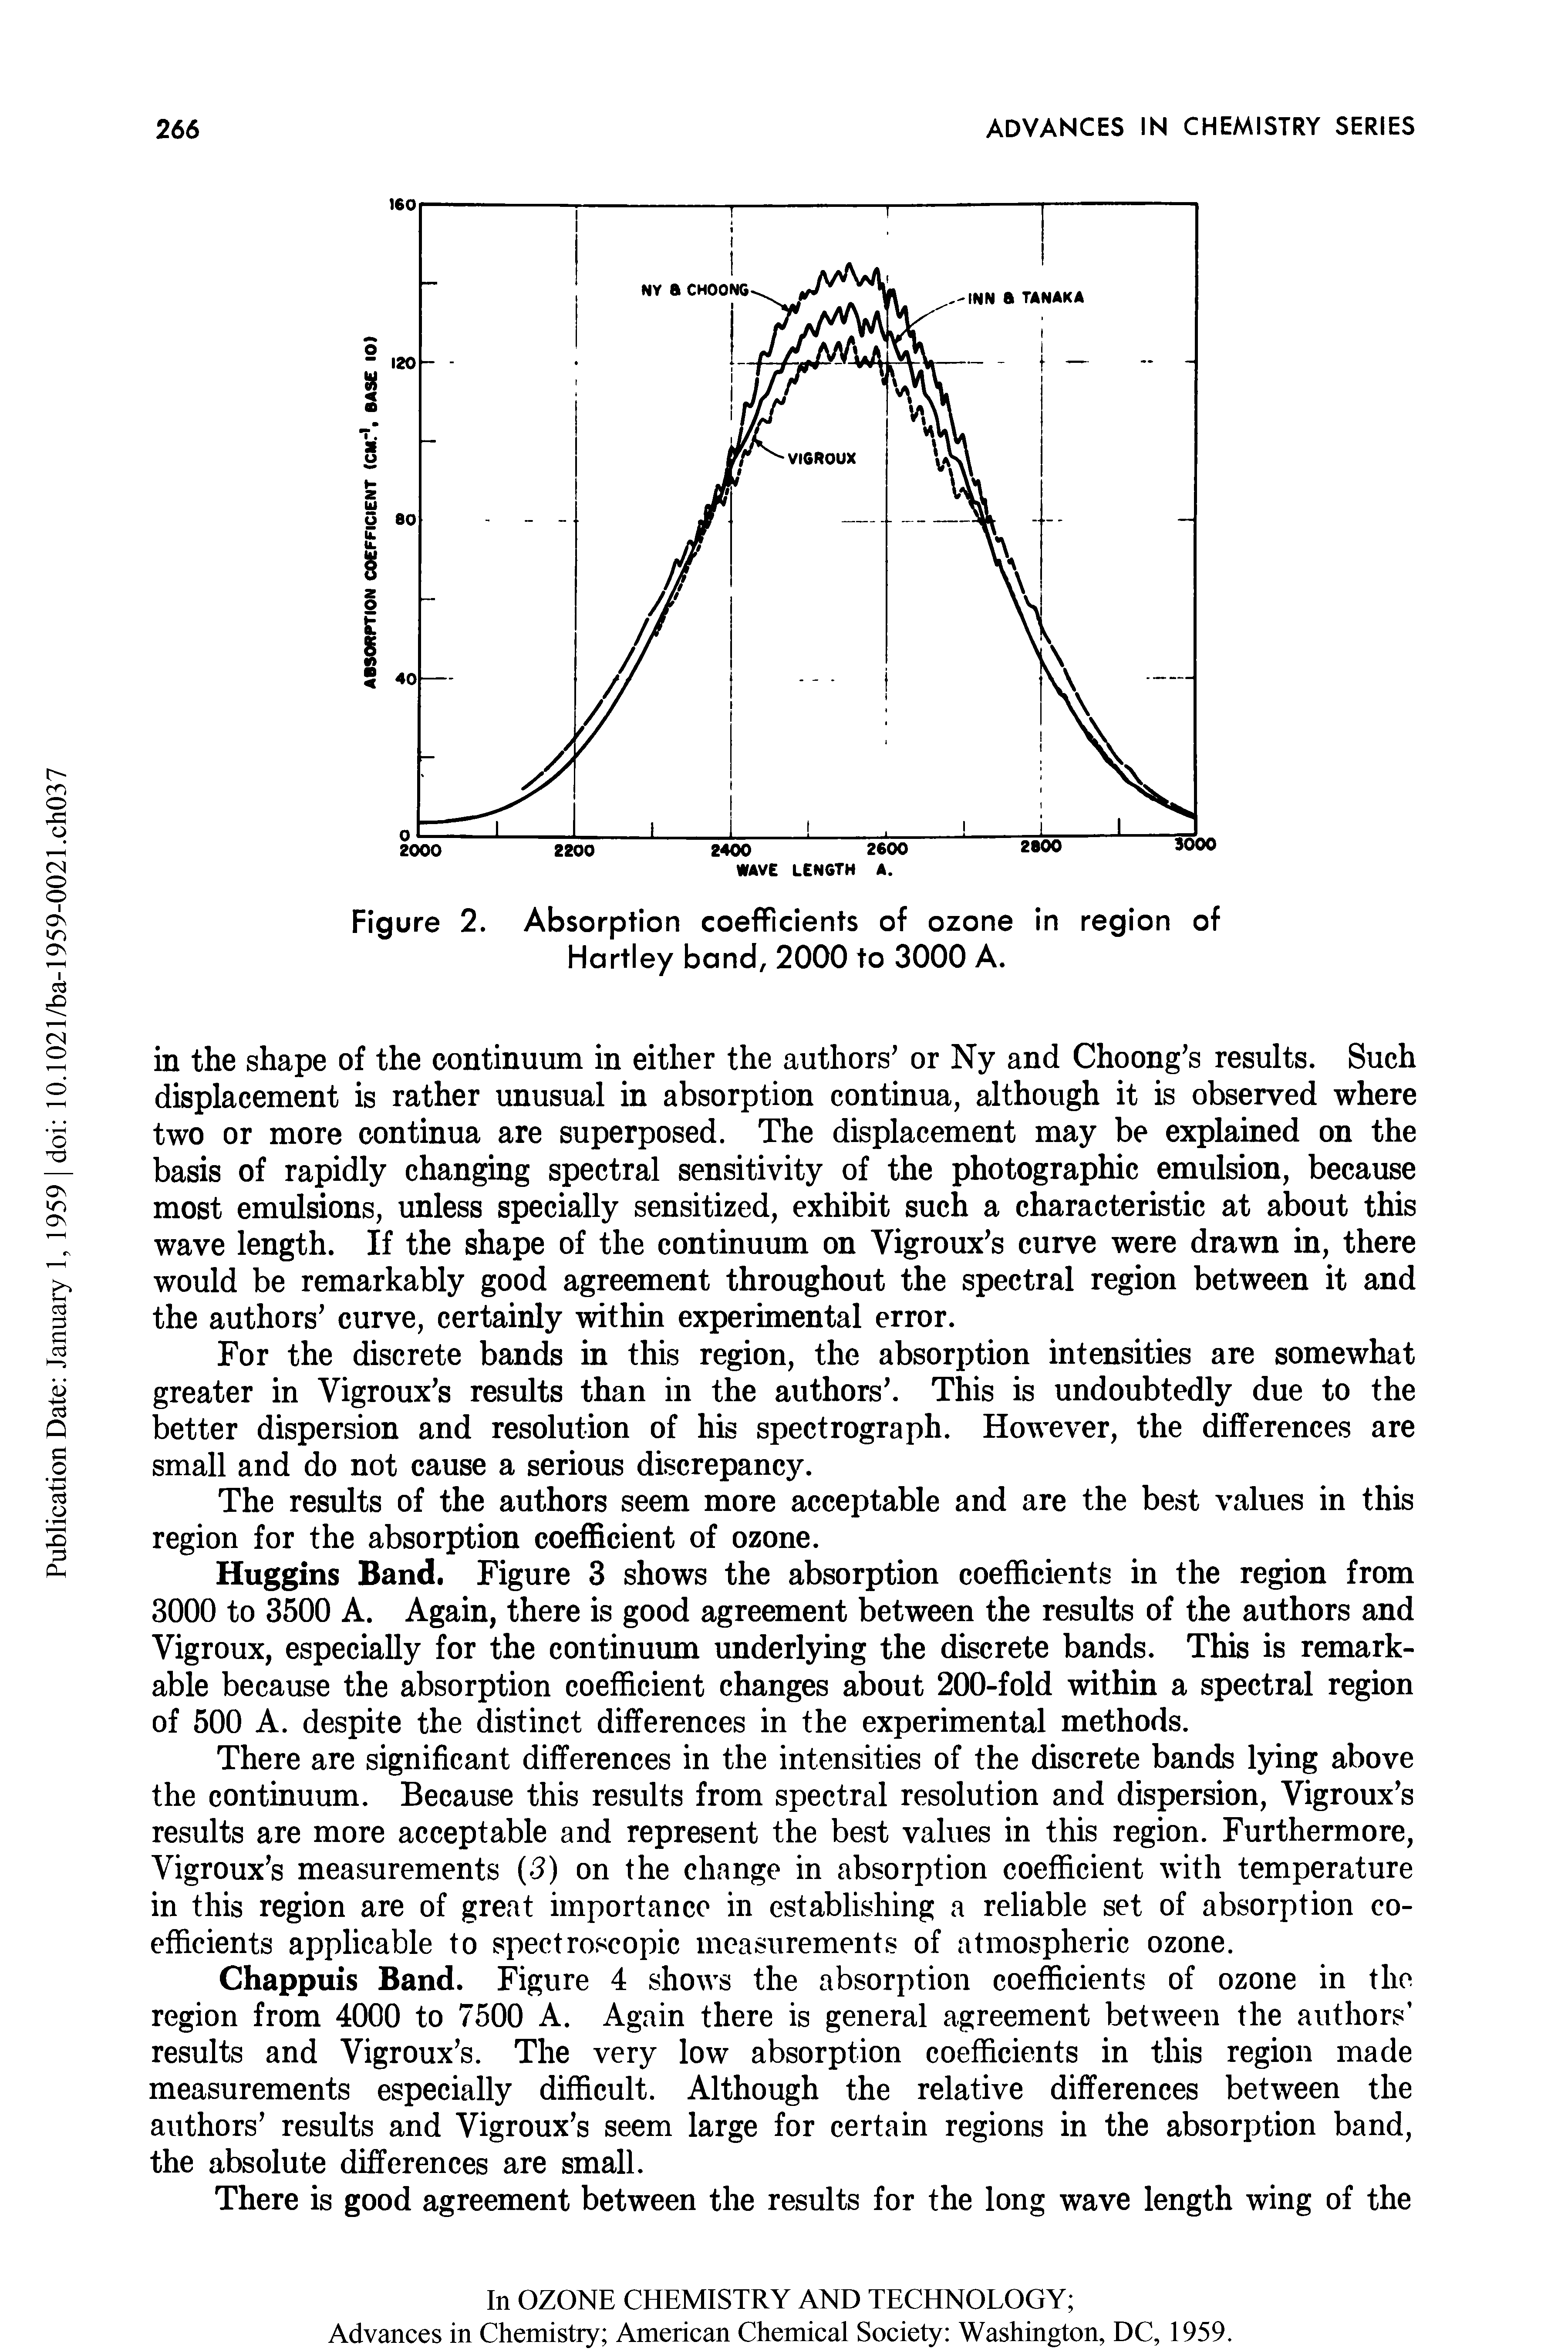 Figure 2. Absorption coefficients of ozone in region of Hartley band, 2000 to 3000 A.